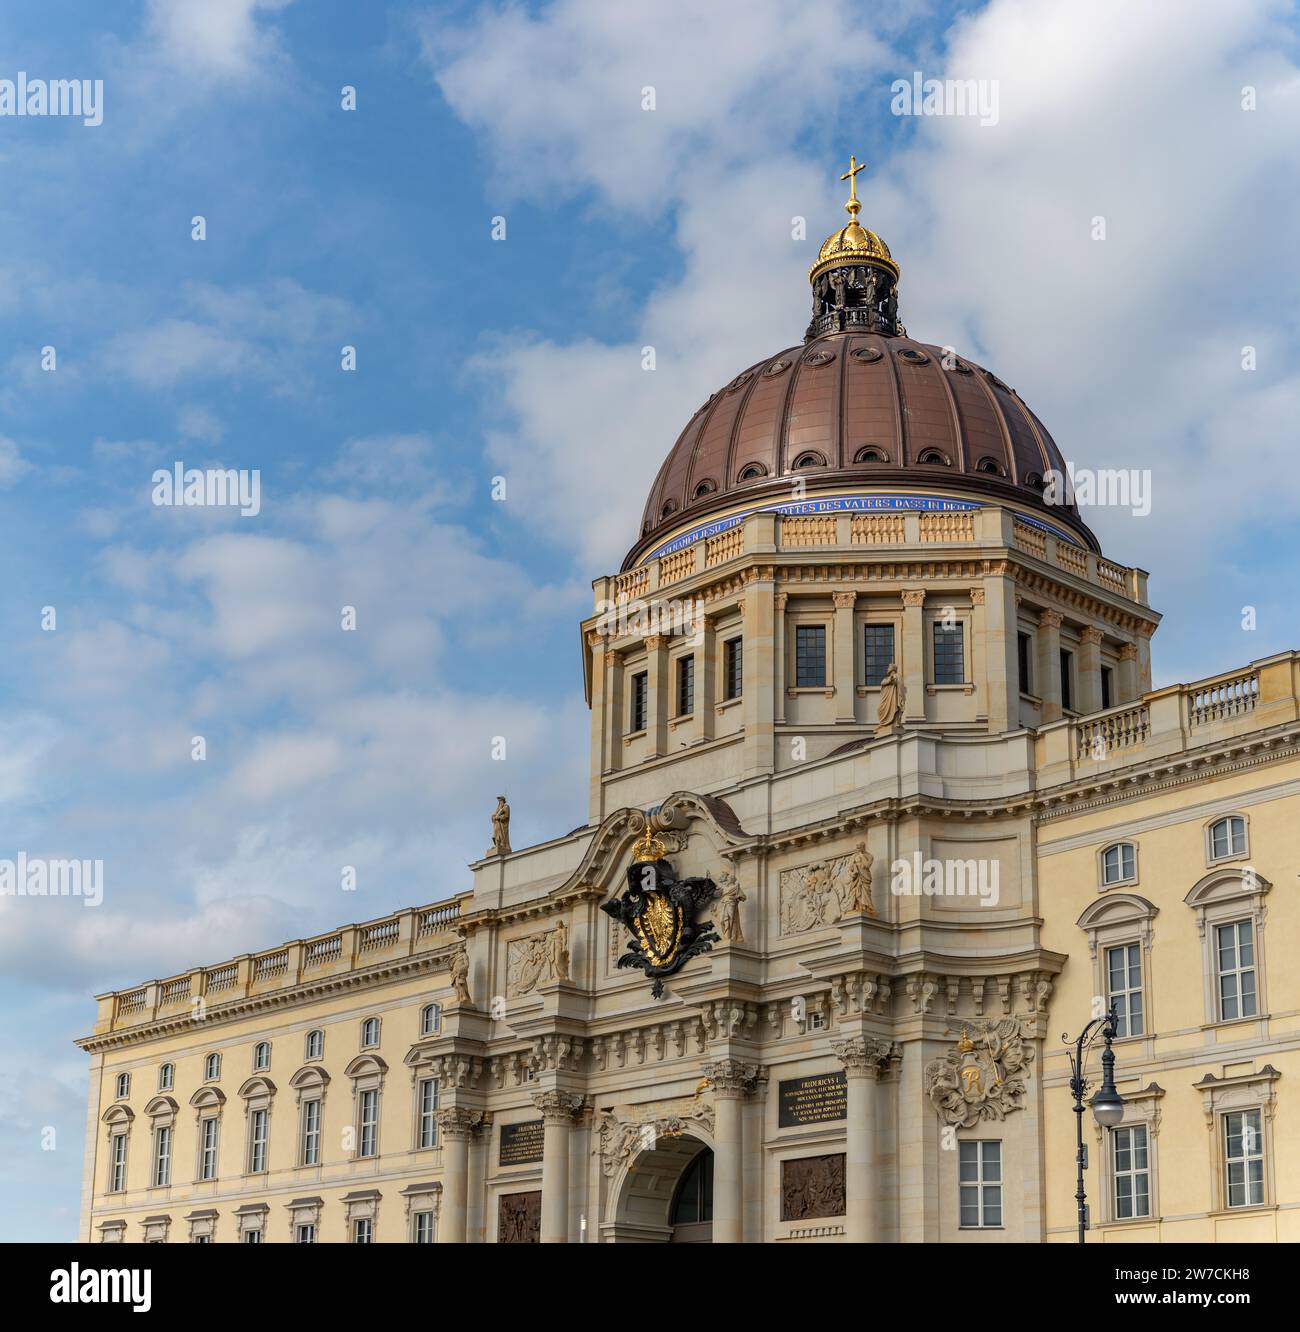 A picture of the dome of the Humboldt Forum or Berlin Palace. Stock Photo